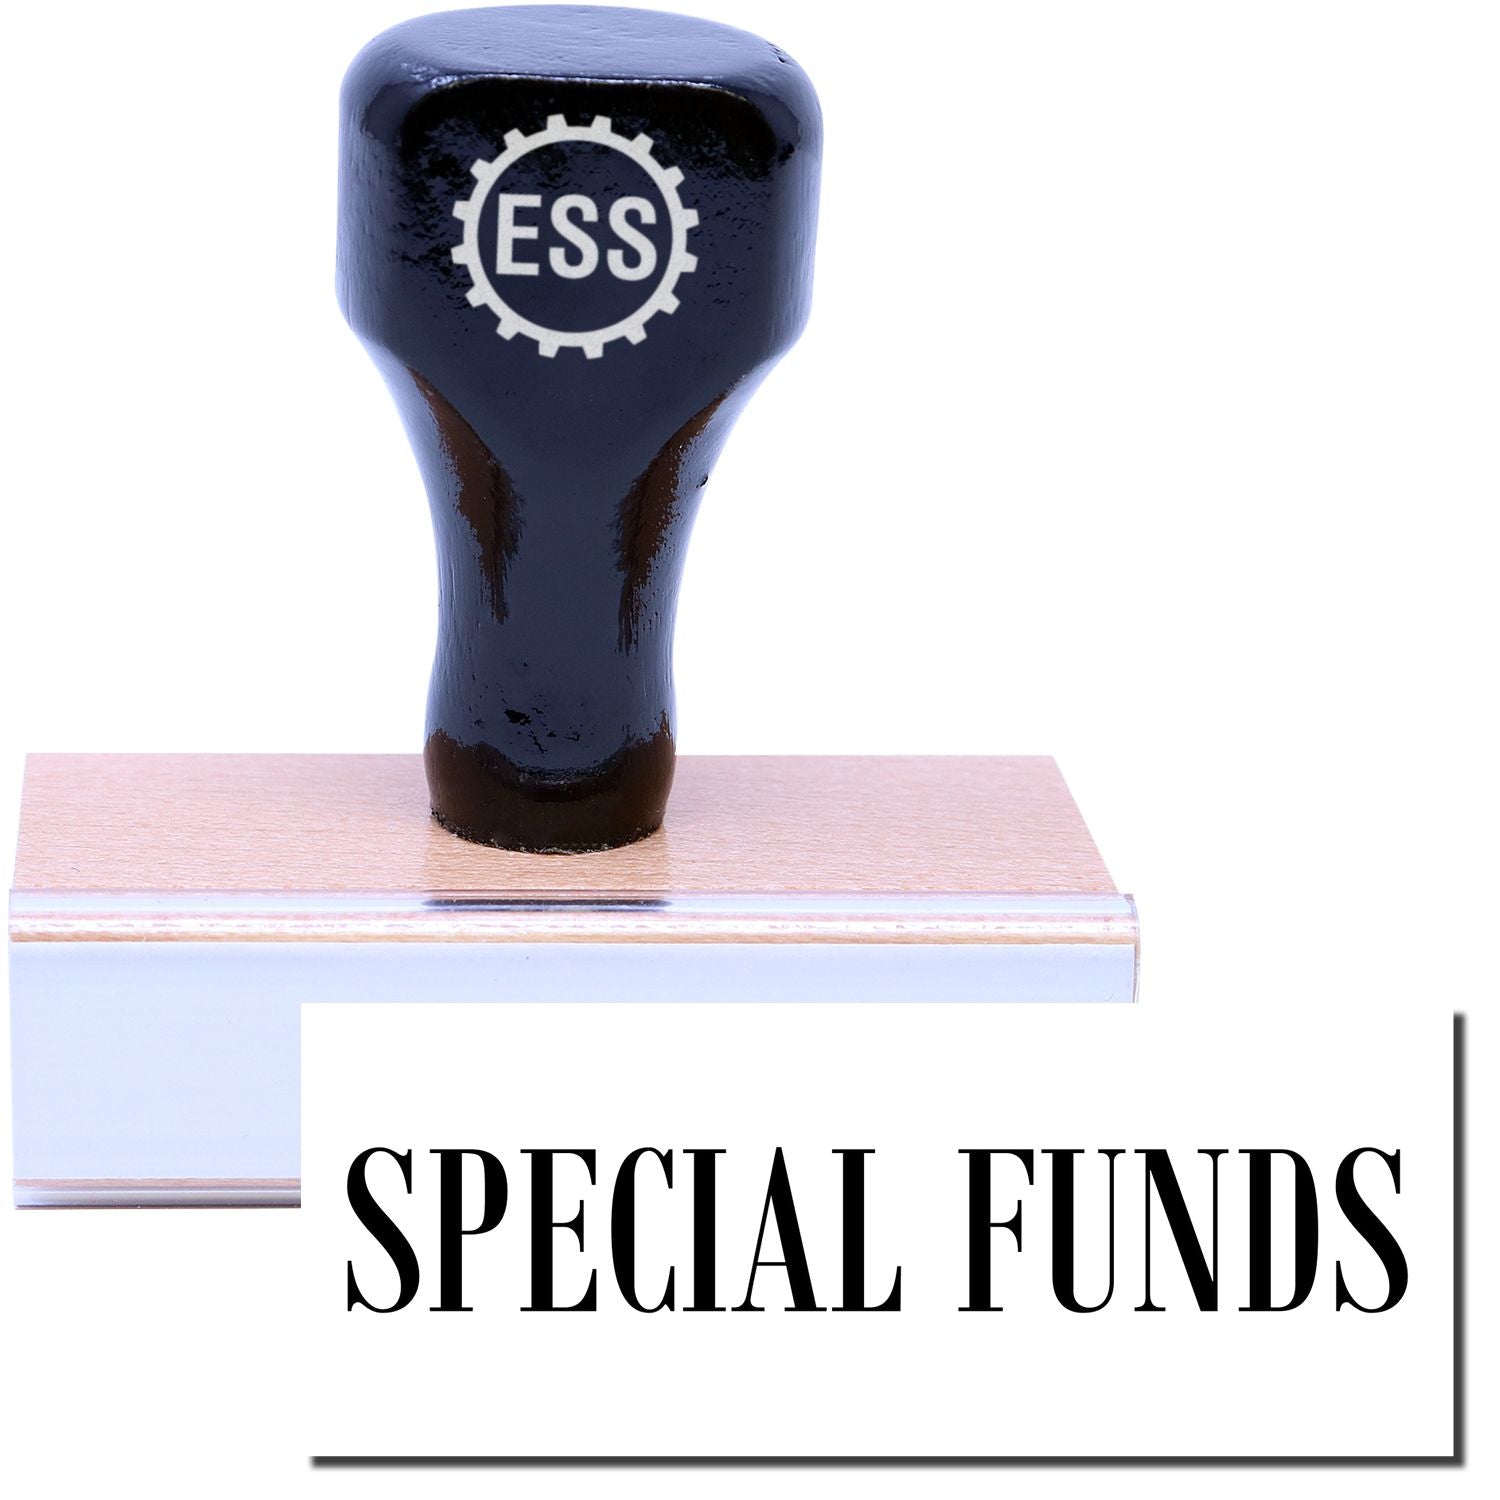 A stock office rubber stamp with a stamped image showing how the text "SPECIAL FUNDS" in a large font is displayed after stamping.